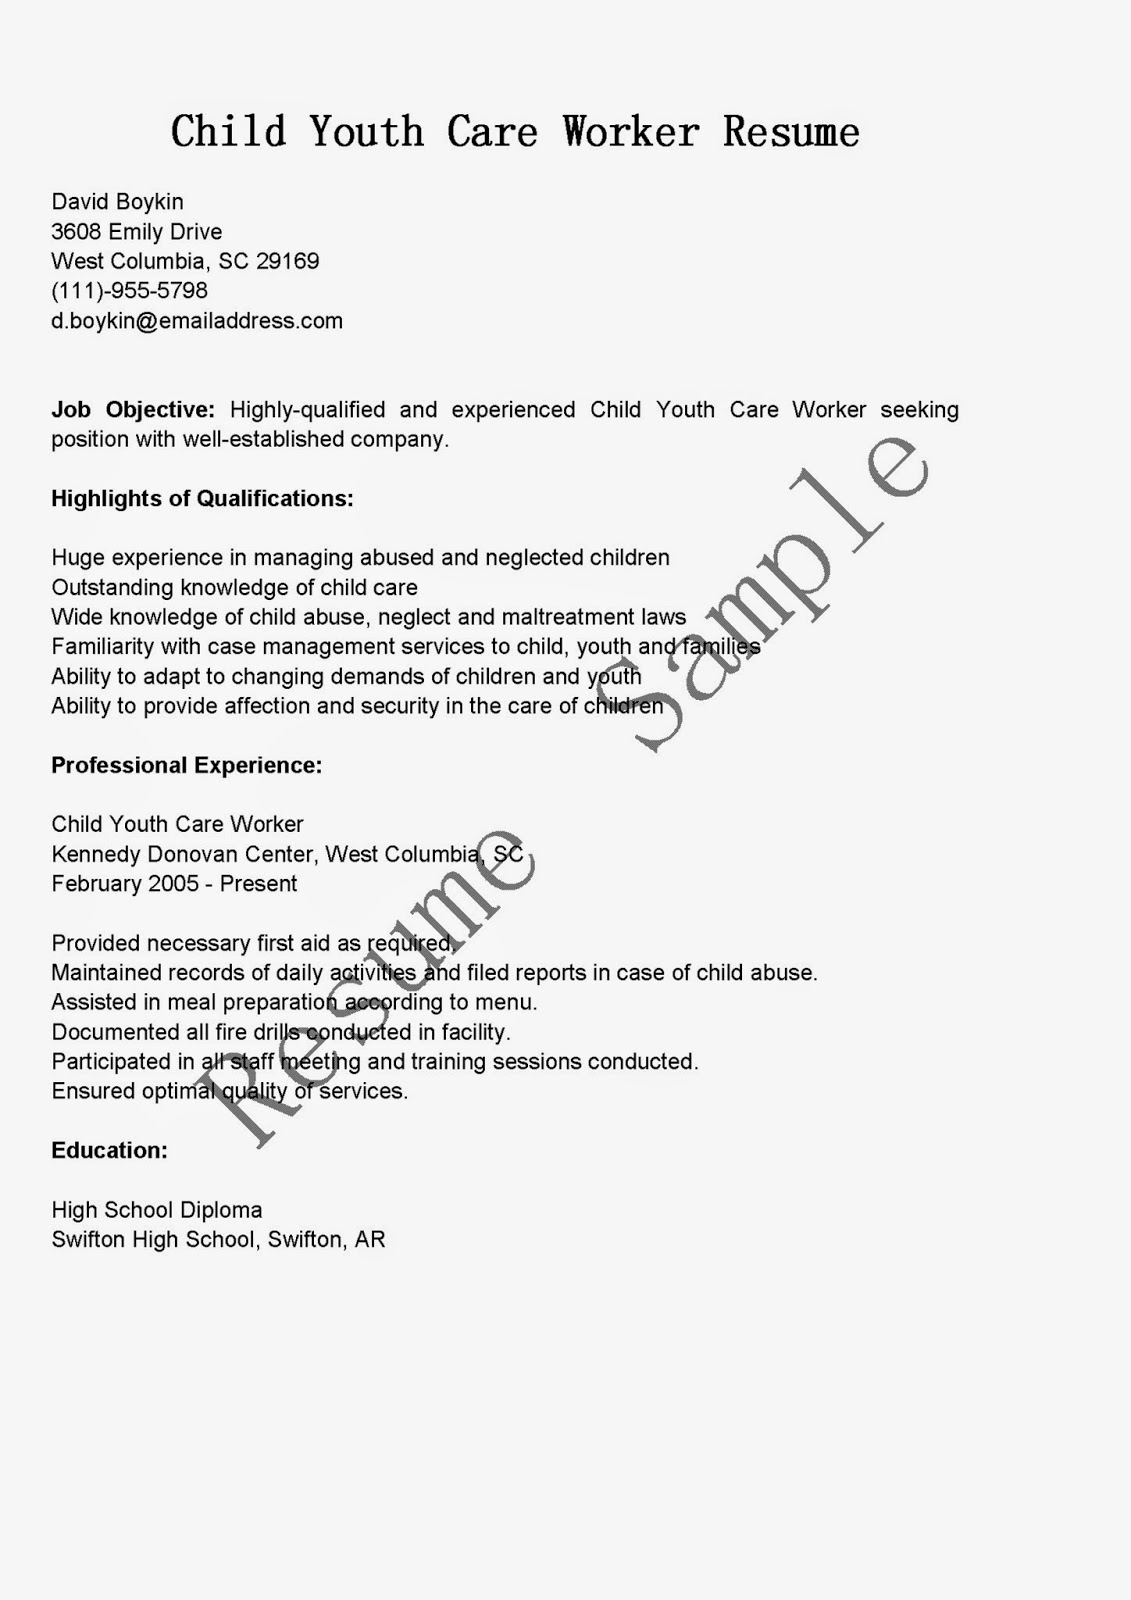 Example of child resume for modeling